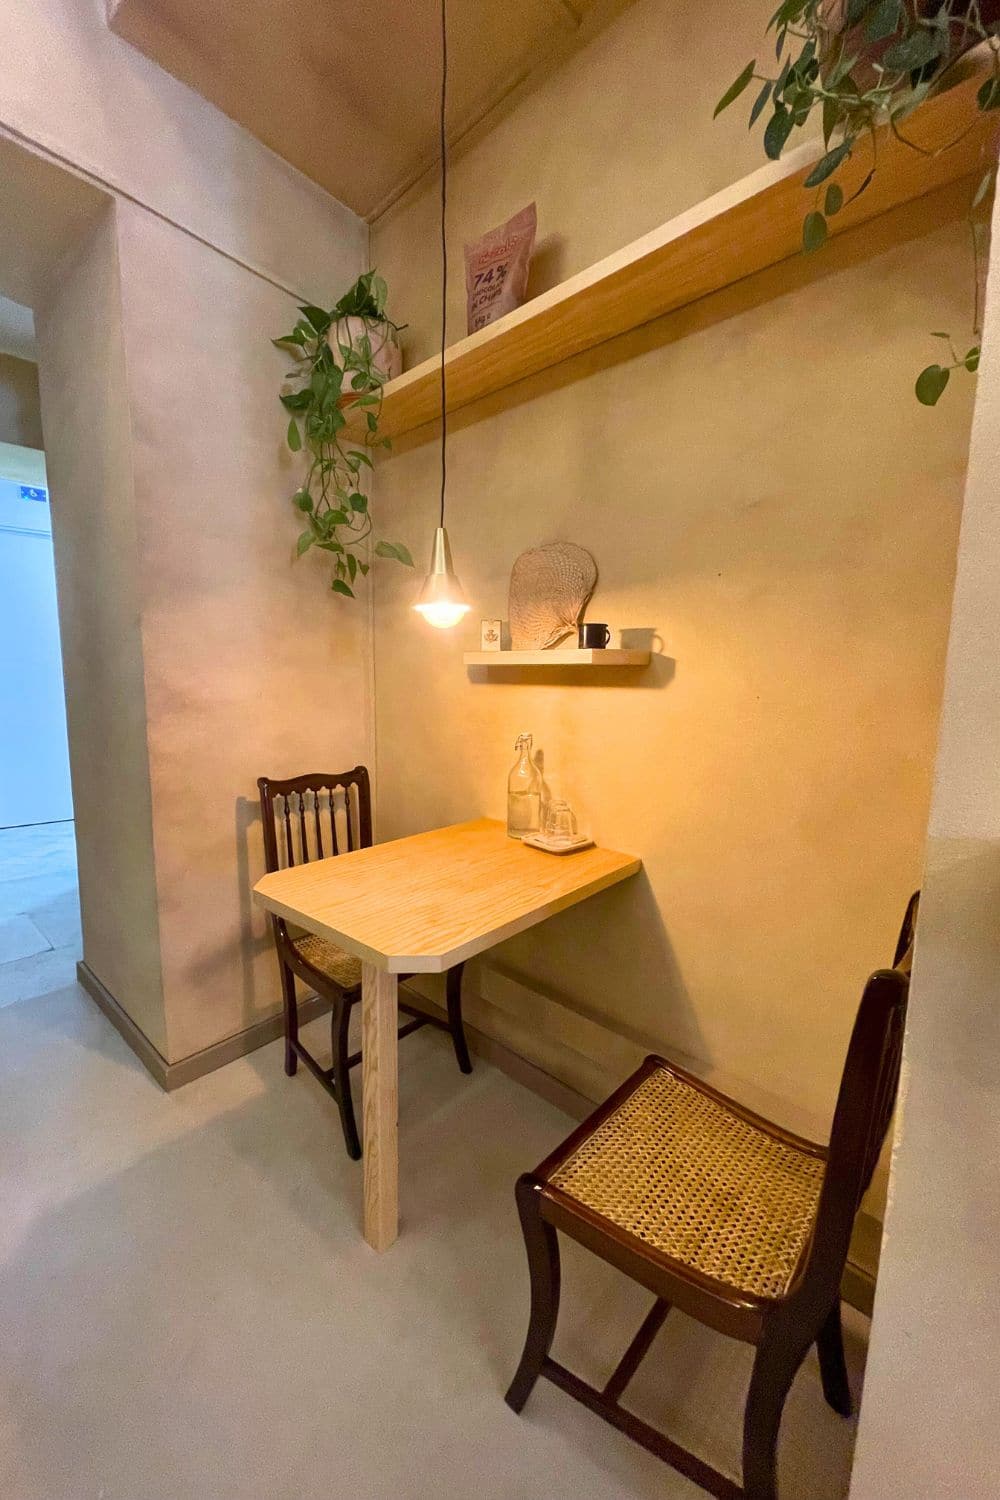 A quaint corner inside Niccolò café, radiating a serene ambiance with a single wooden table and a woven chair. A hanging plant and a warm pendant light above create a cozy, intimate space for savoring coffee and chocolates in peace.